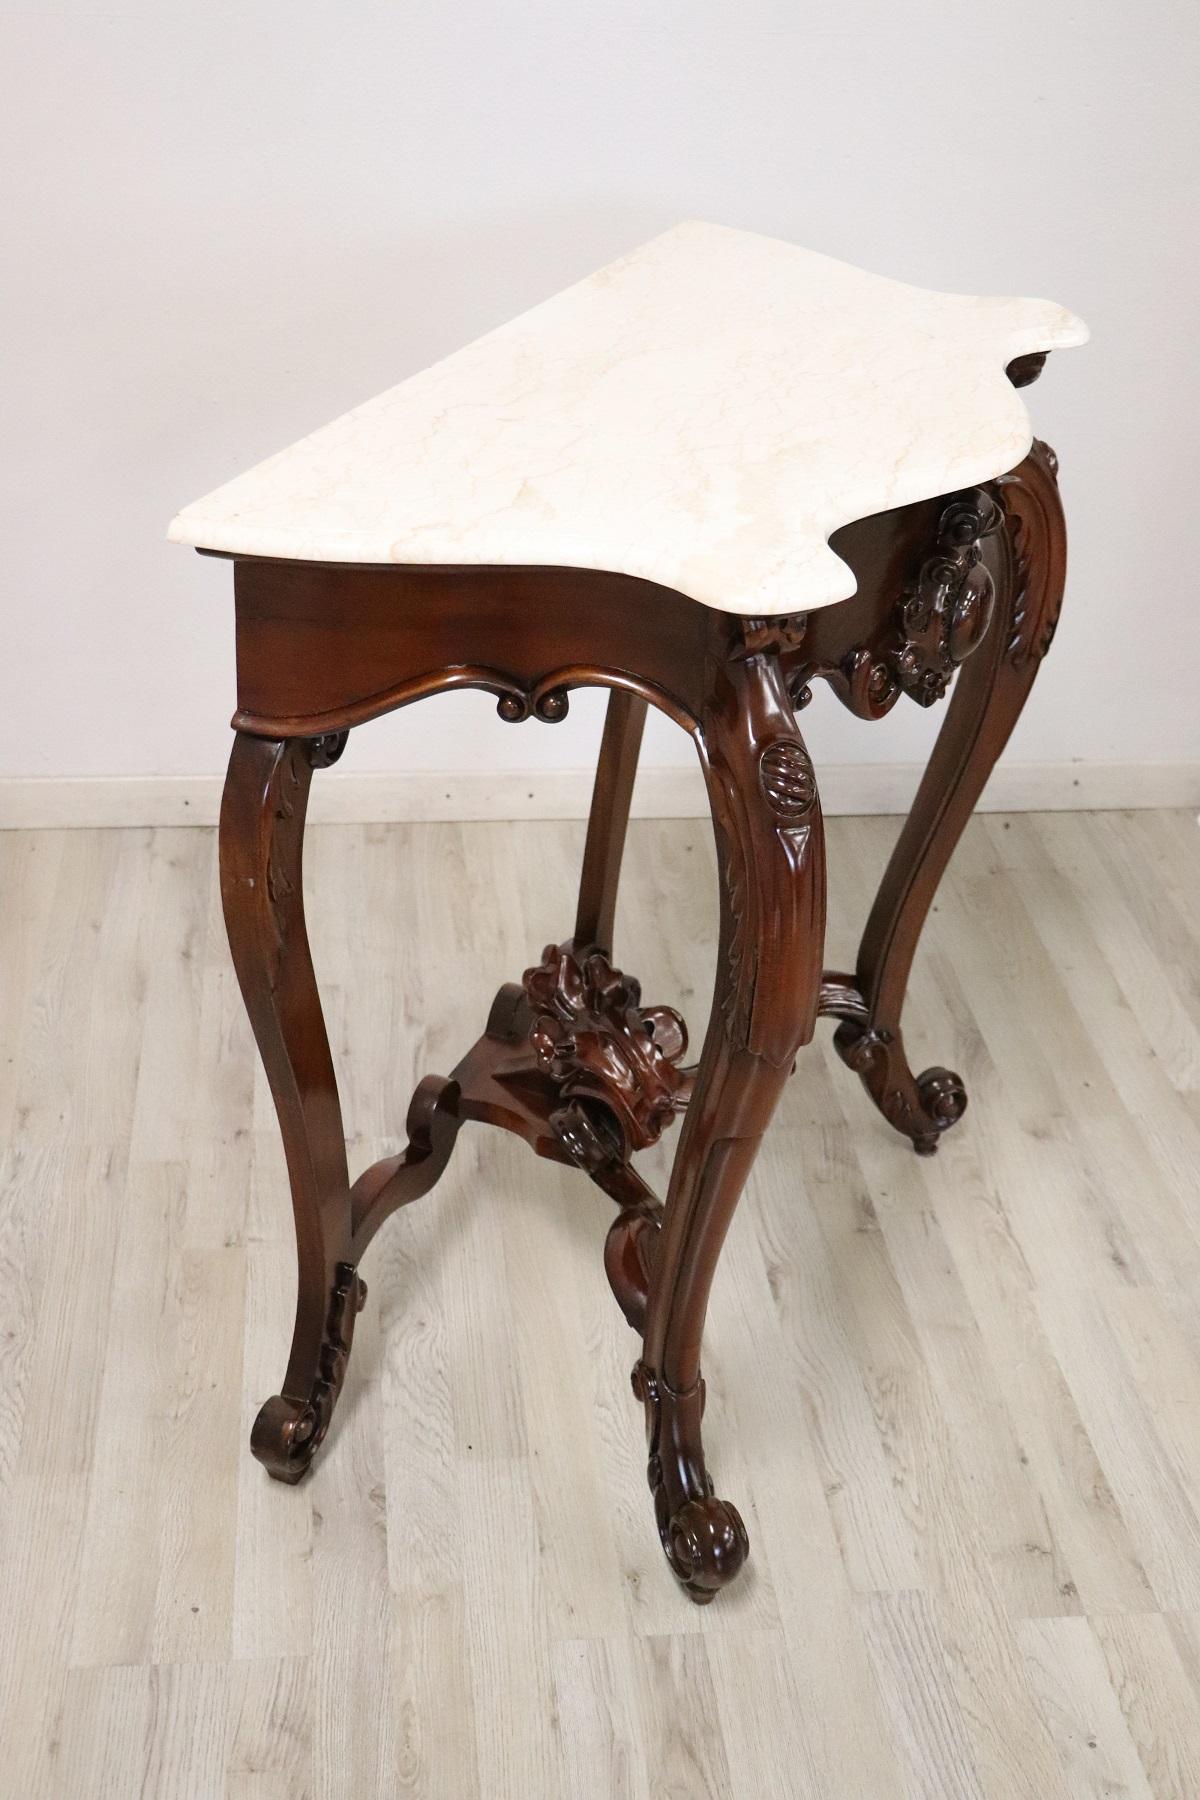 Console table of rare small size mid-20th century in Louis Philippe style. The console is made of solid carved walnut with floral decorations. Elegant Italian marble top. Rare due to its small size, perfect to be placed even in small rooms or